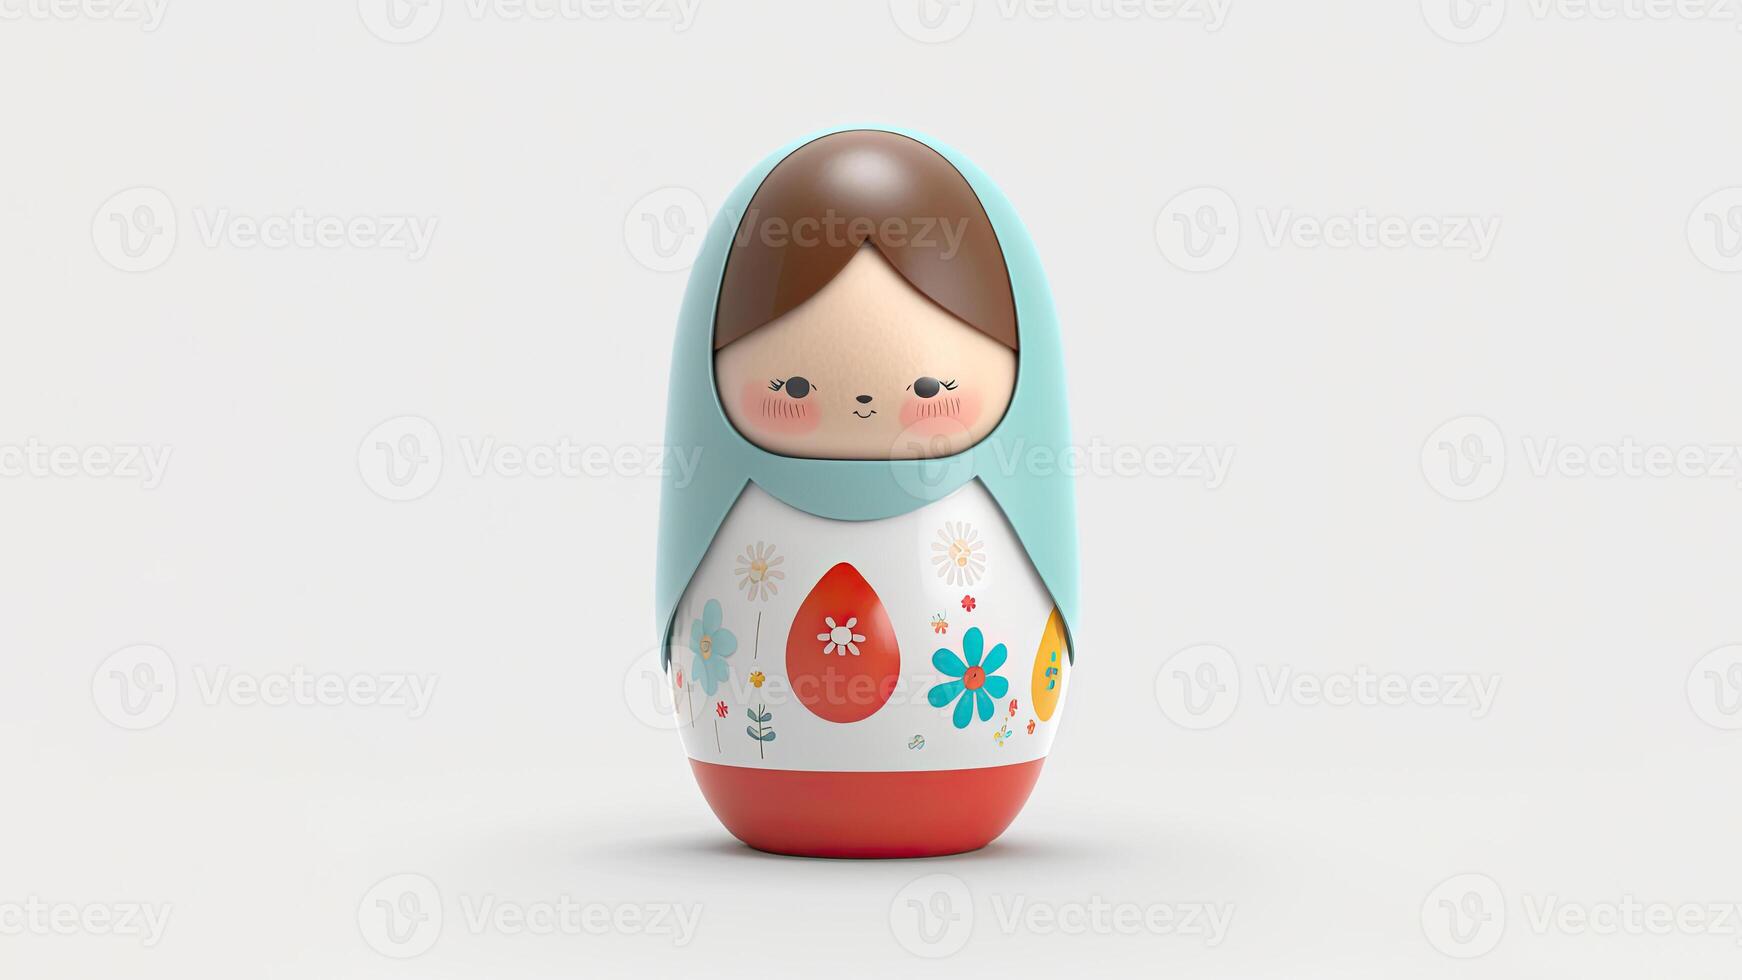 3D Render of Matryoshka Doll Against Background And Copy Space. Easter Day Concept. photo